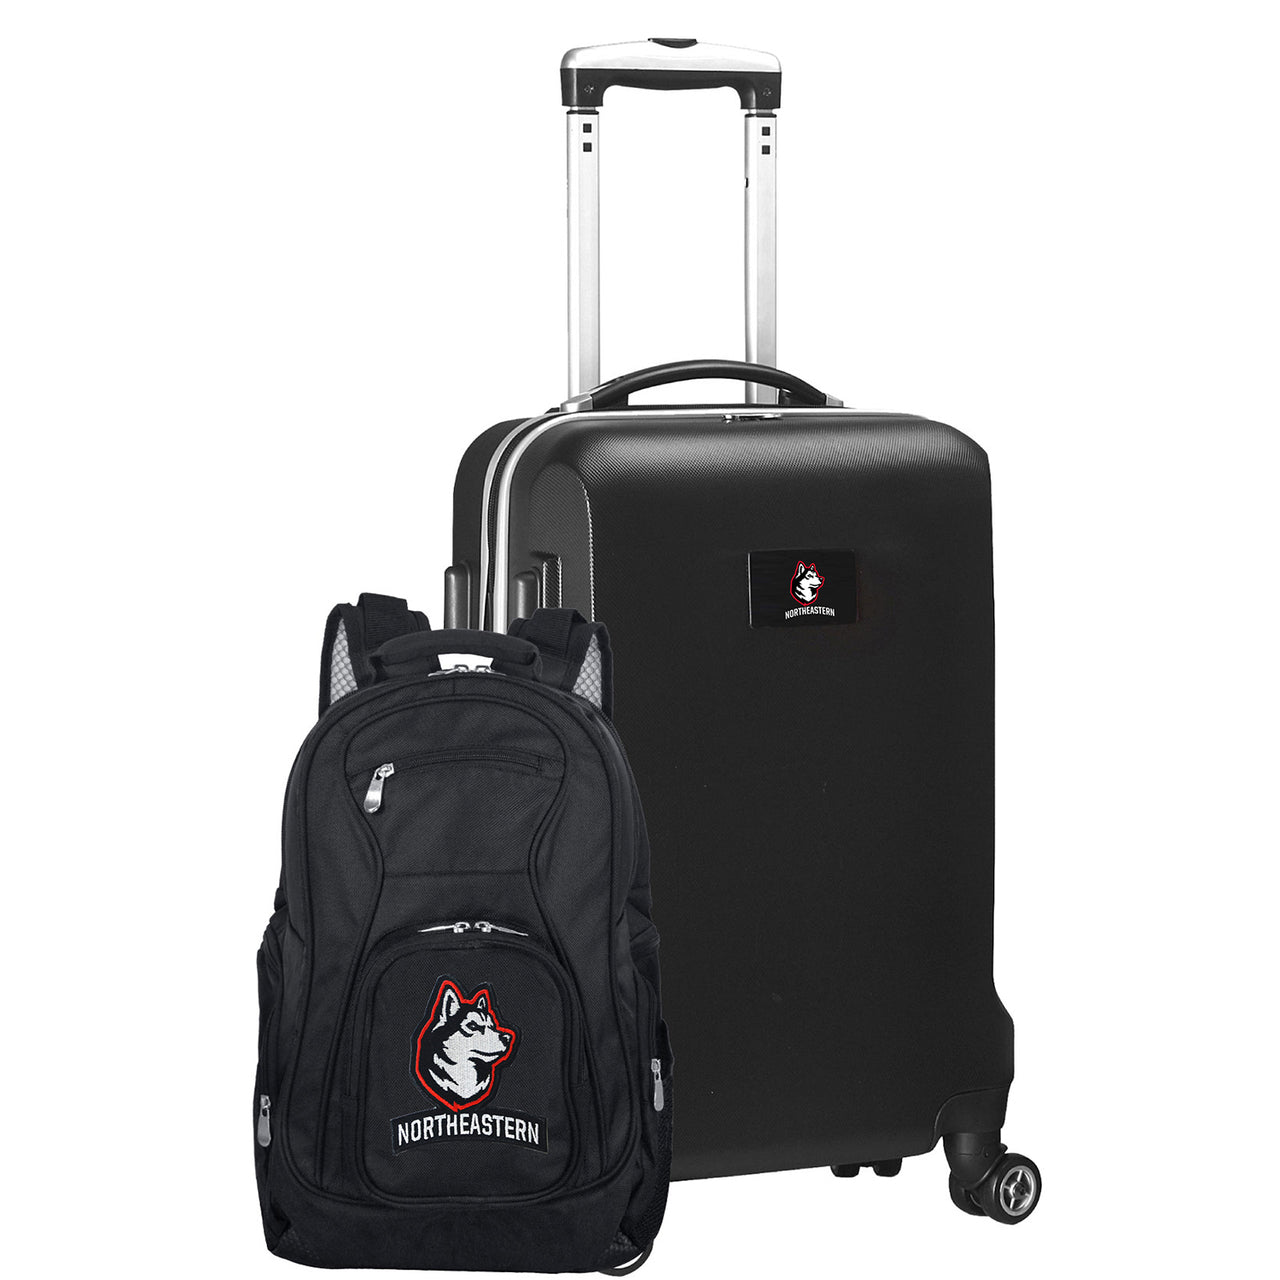 Northeastern Huskies Deluxe 2-Piece Backpack and Carry-on Set in Black